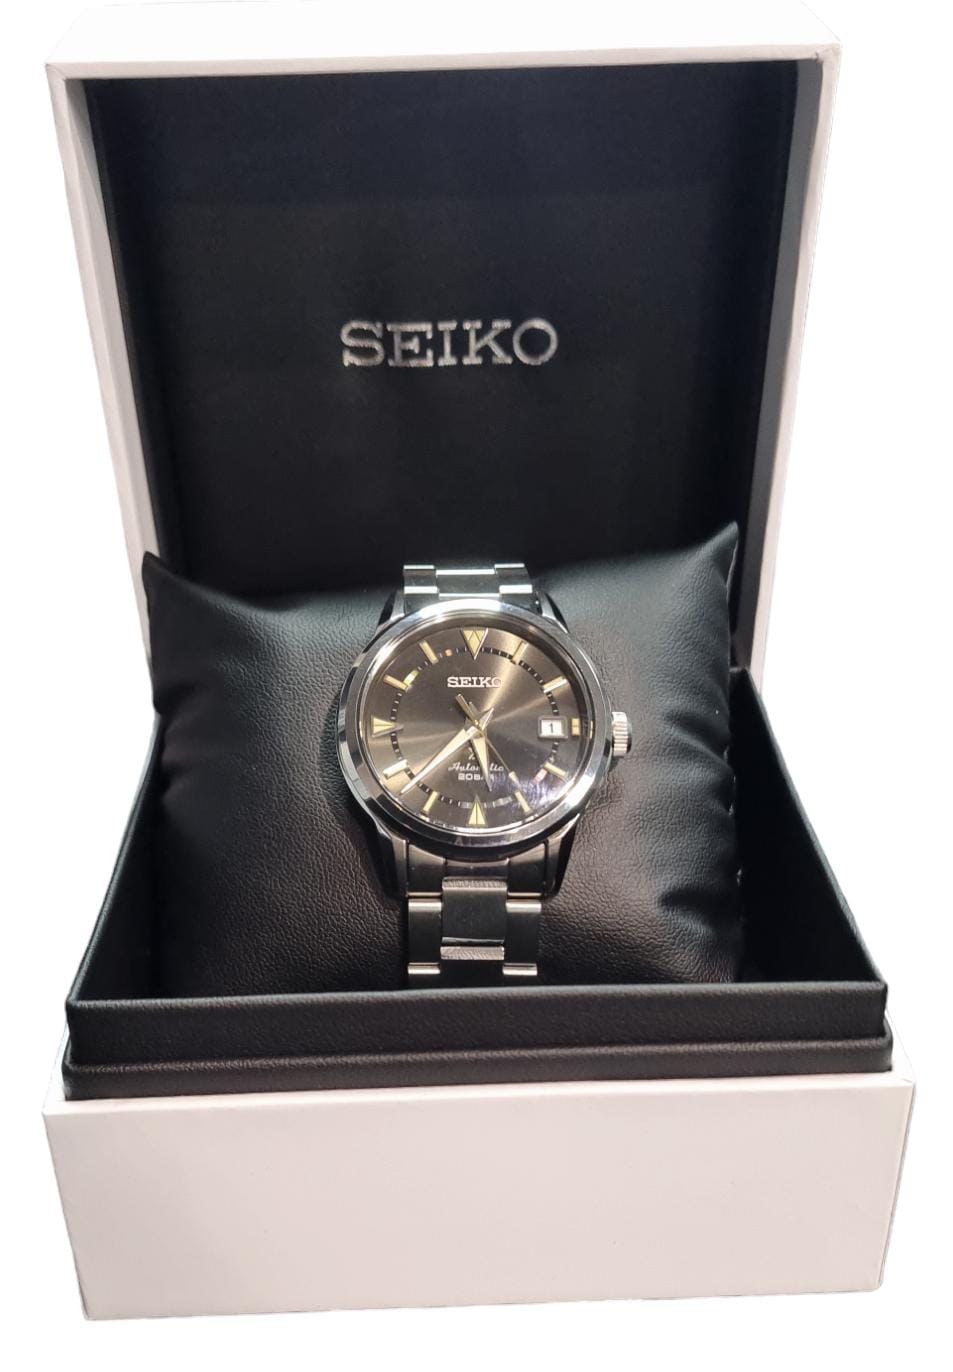 Seiko Prospex - 6R35-01M0 - 24 Jewels - Stainless Steel - Automatic Watch - Boxed